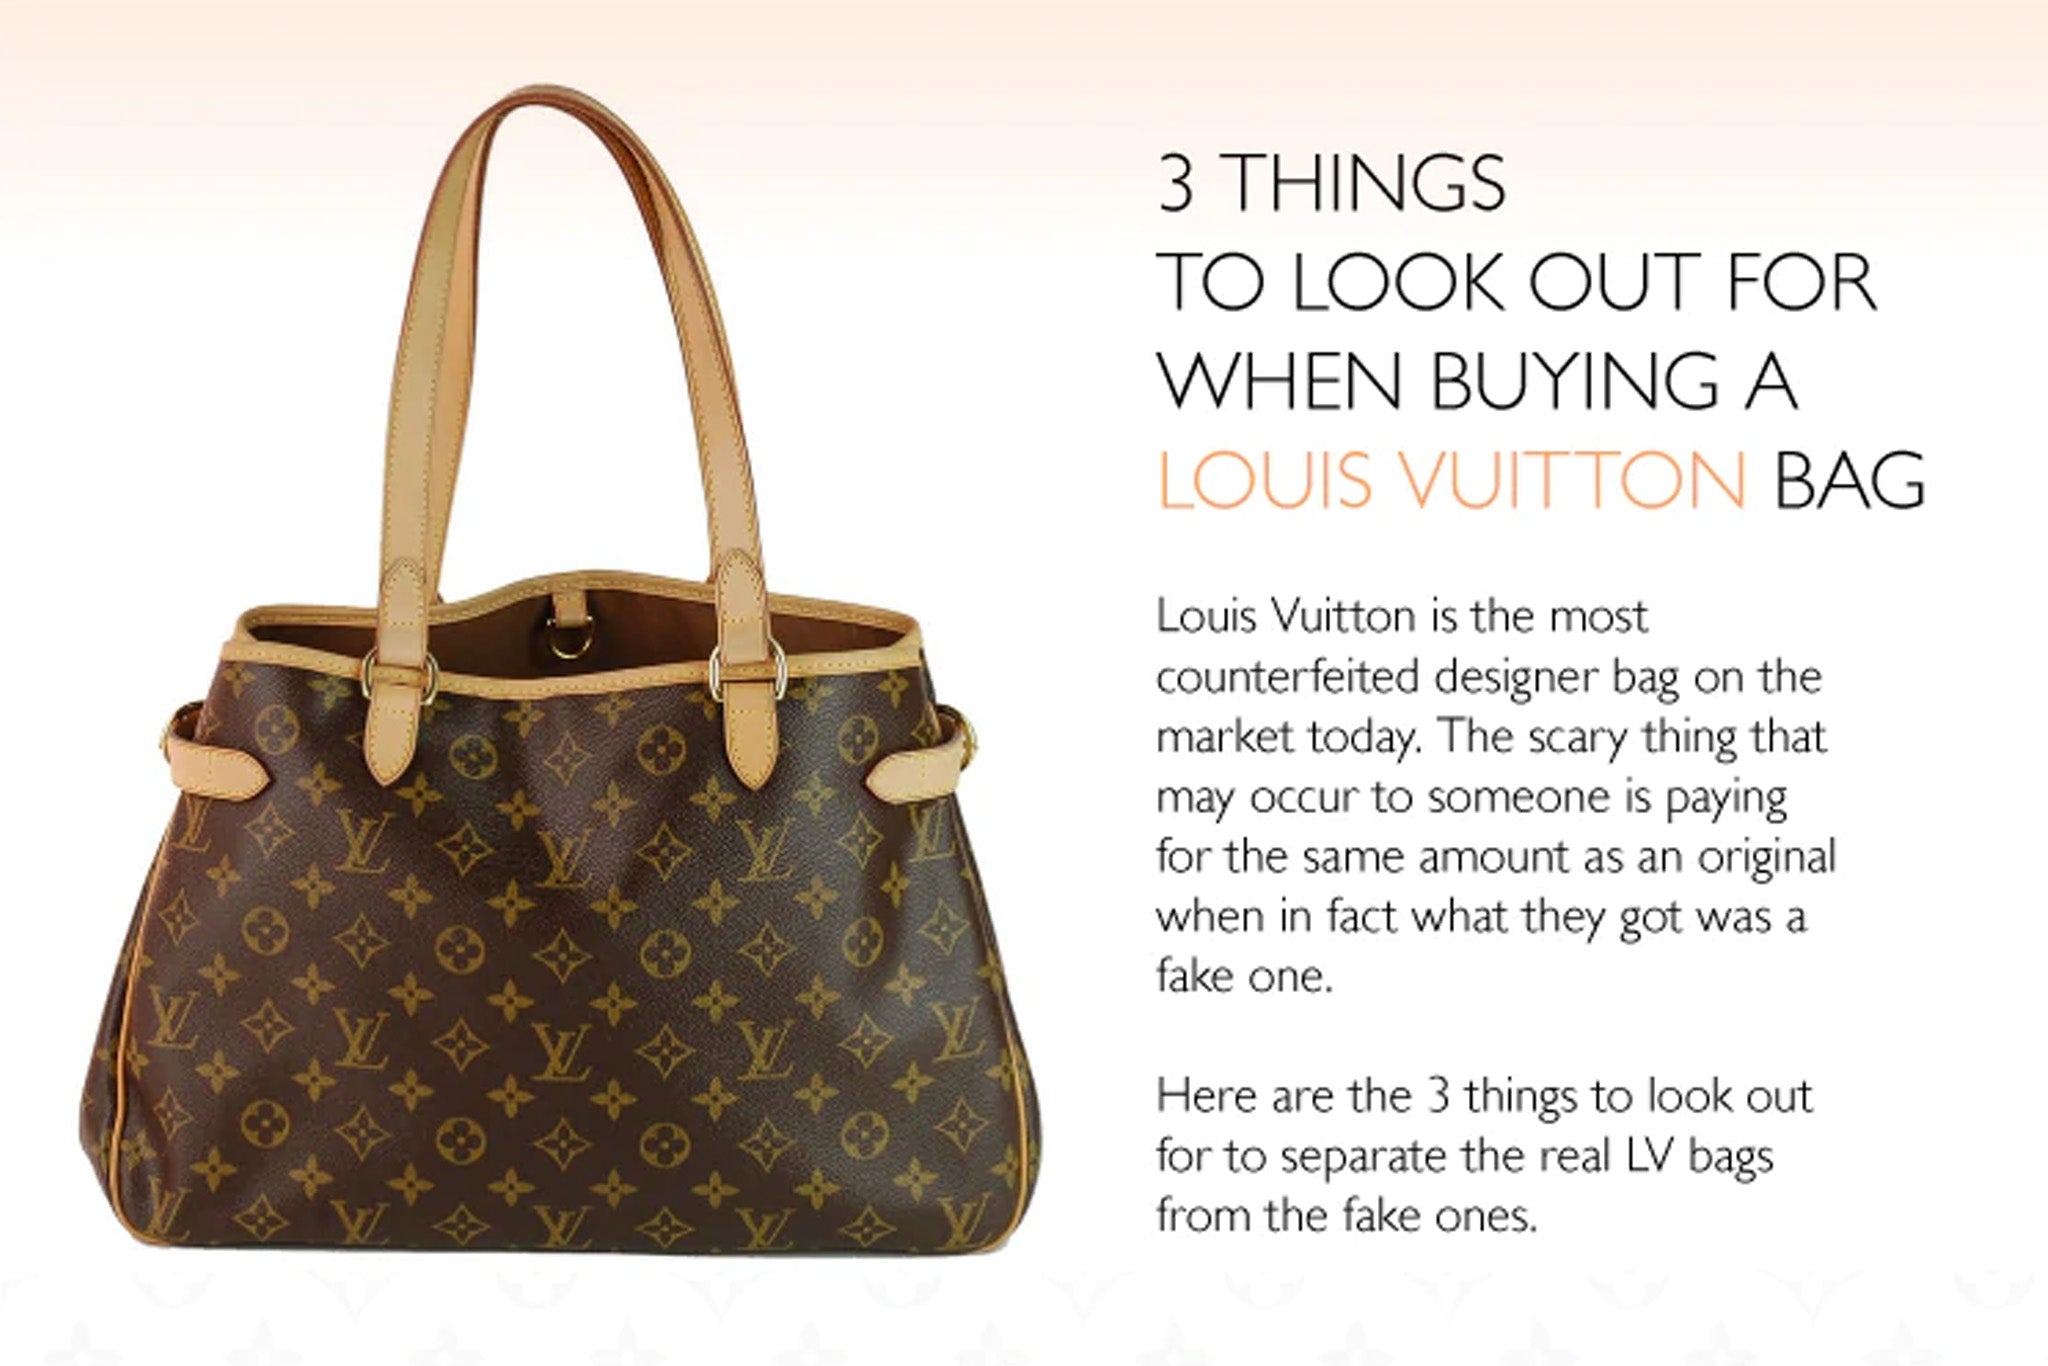 How To Look After Louis Vuitton Bag